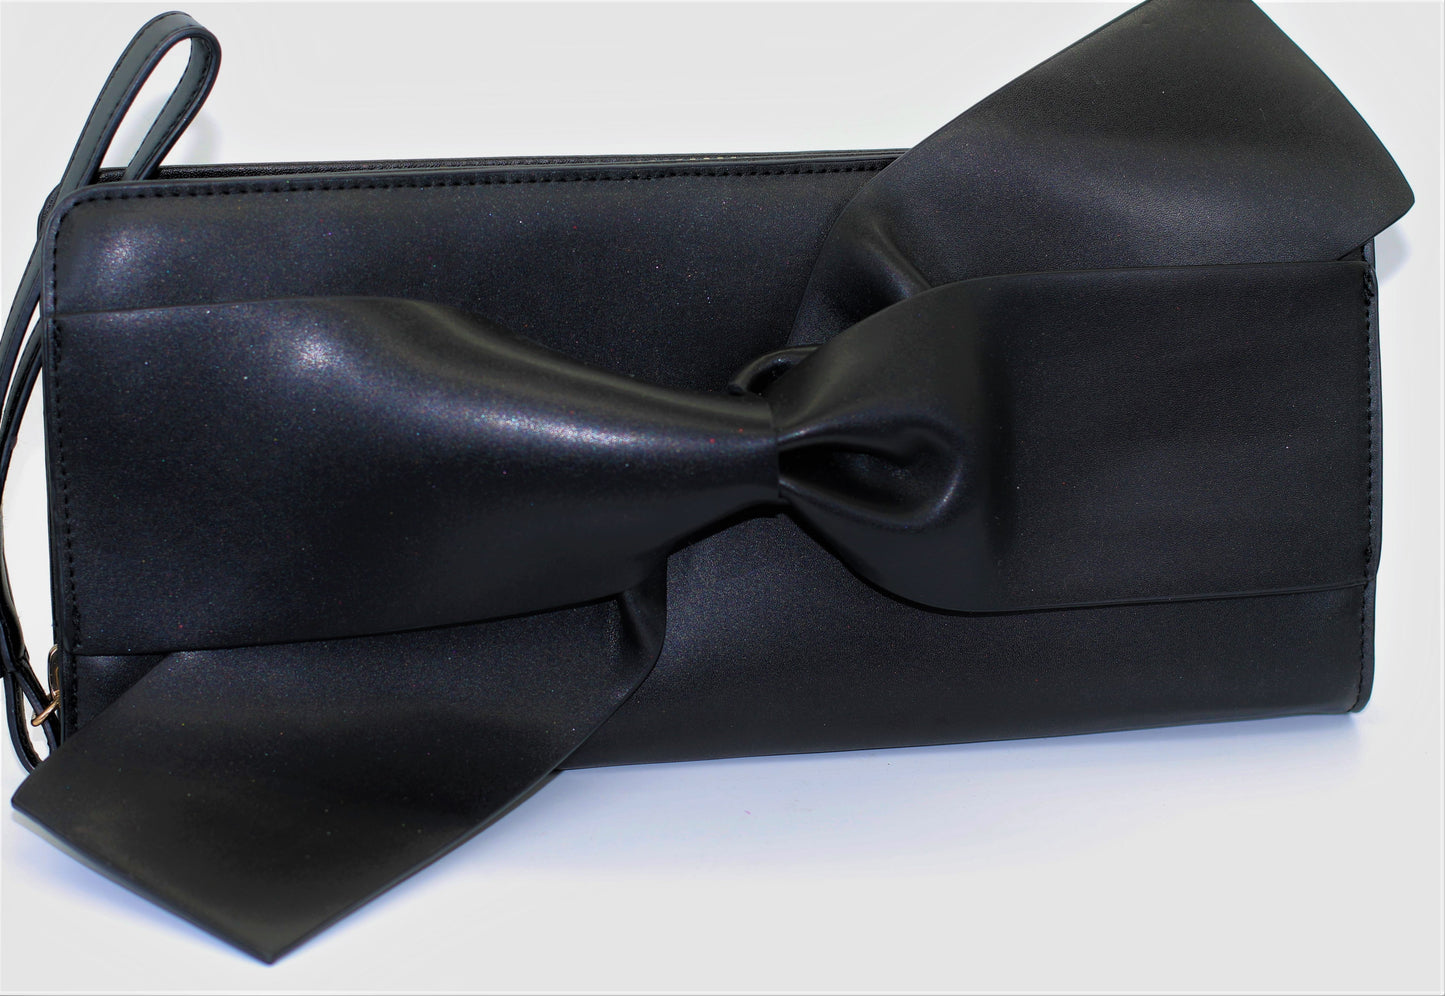 Front Bow Clutch Purse